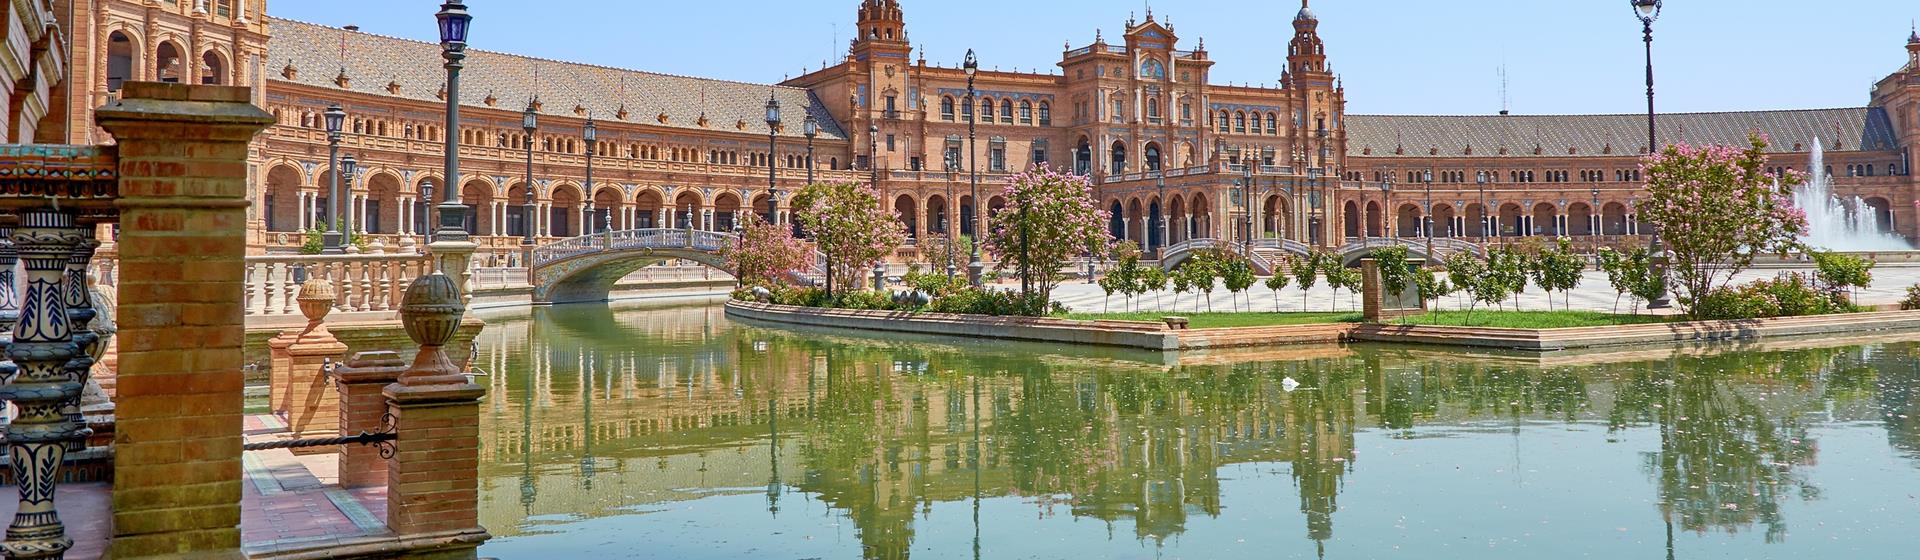 Holidays & City Breaks to Seville